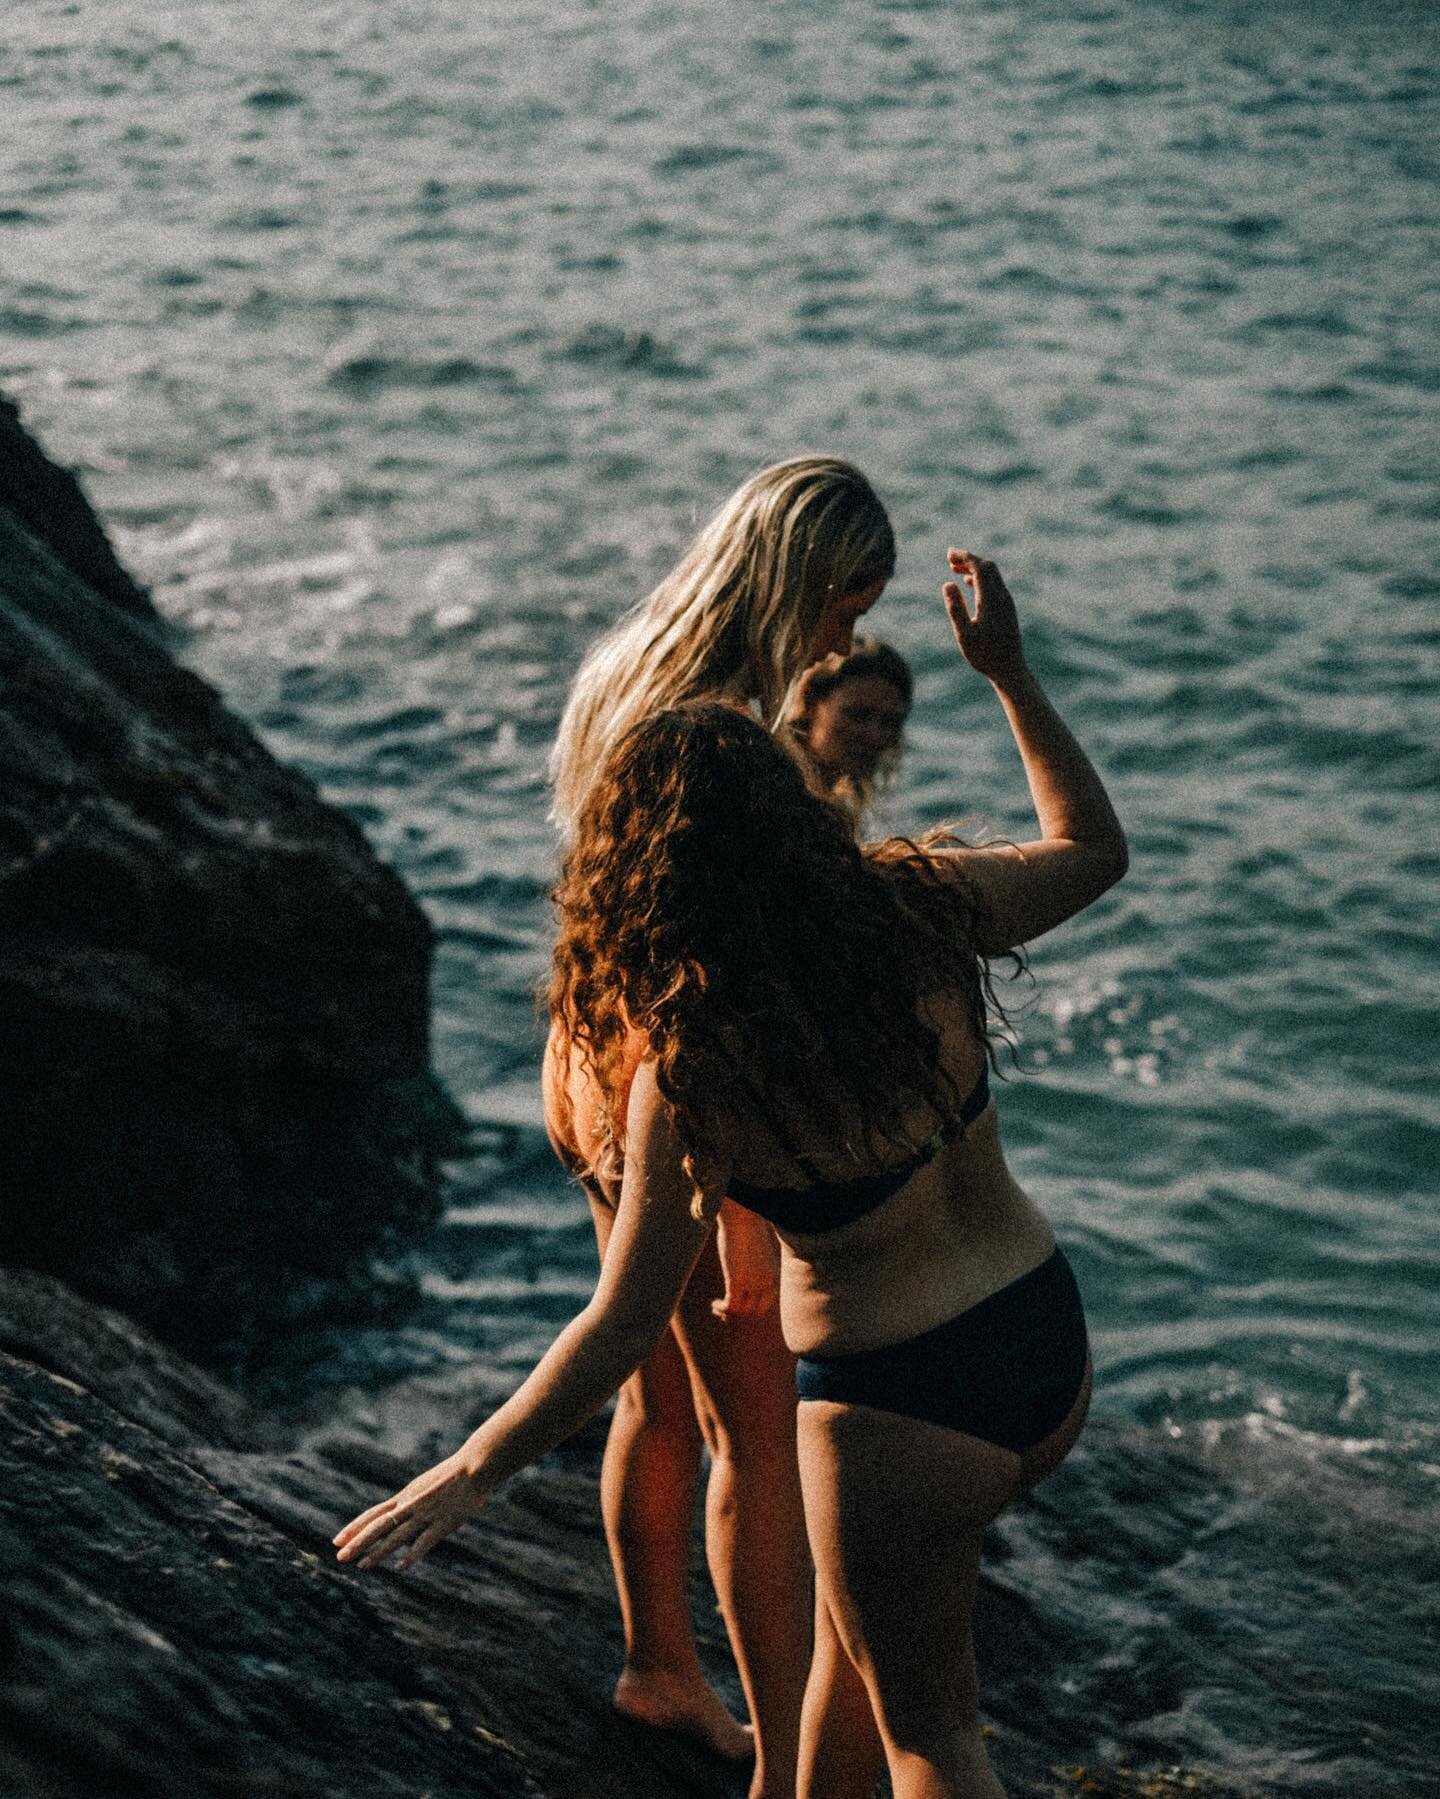 Sol and Sea
The season salt and sun adorn our bodies
Each day a kiss from the sun, the taste of salt
The time to play
To discover with those you love, this feeling... this sense
The sheer intoxication of being alive

Swimmers: @maddyjonees @milla.mag